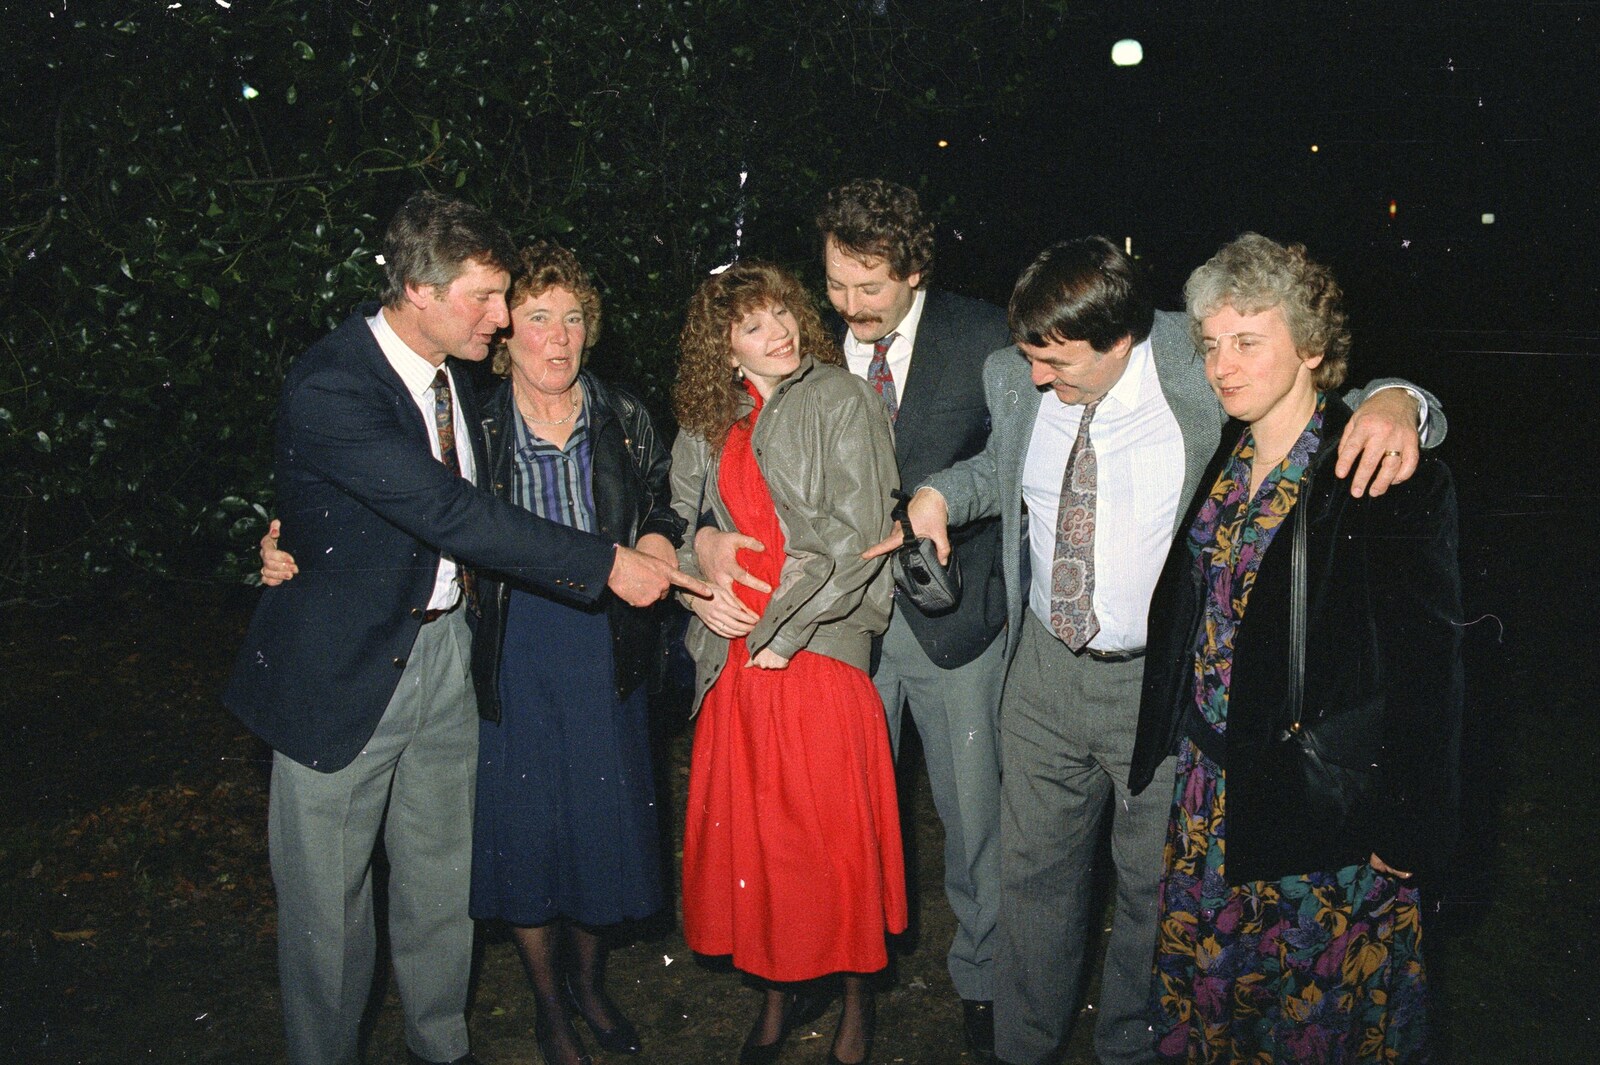 Everyone points to Monique's belly from Clays Does Bruges, Belgium - 19th December 1992